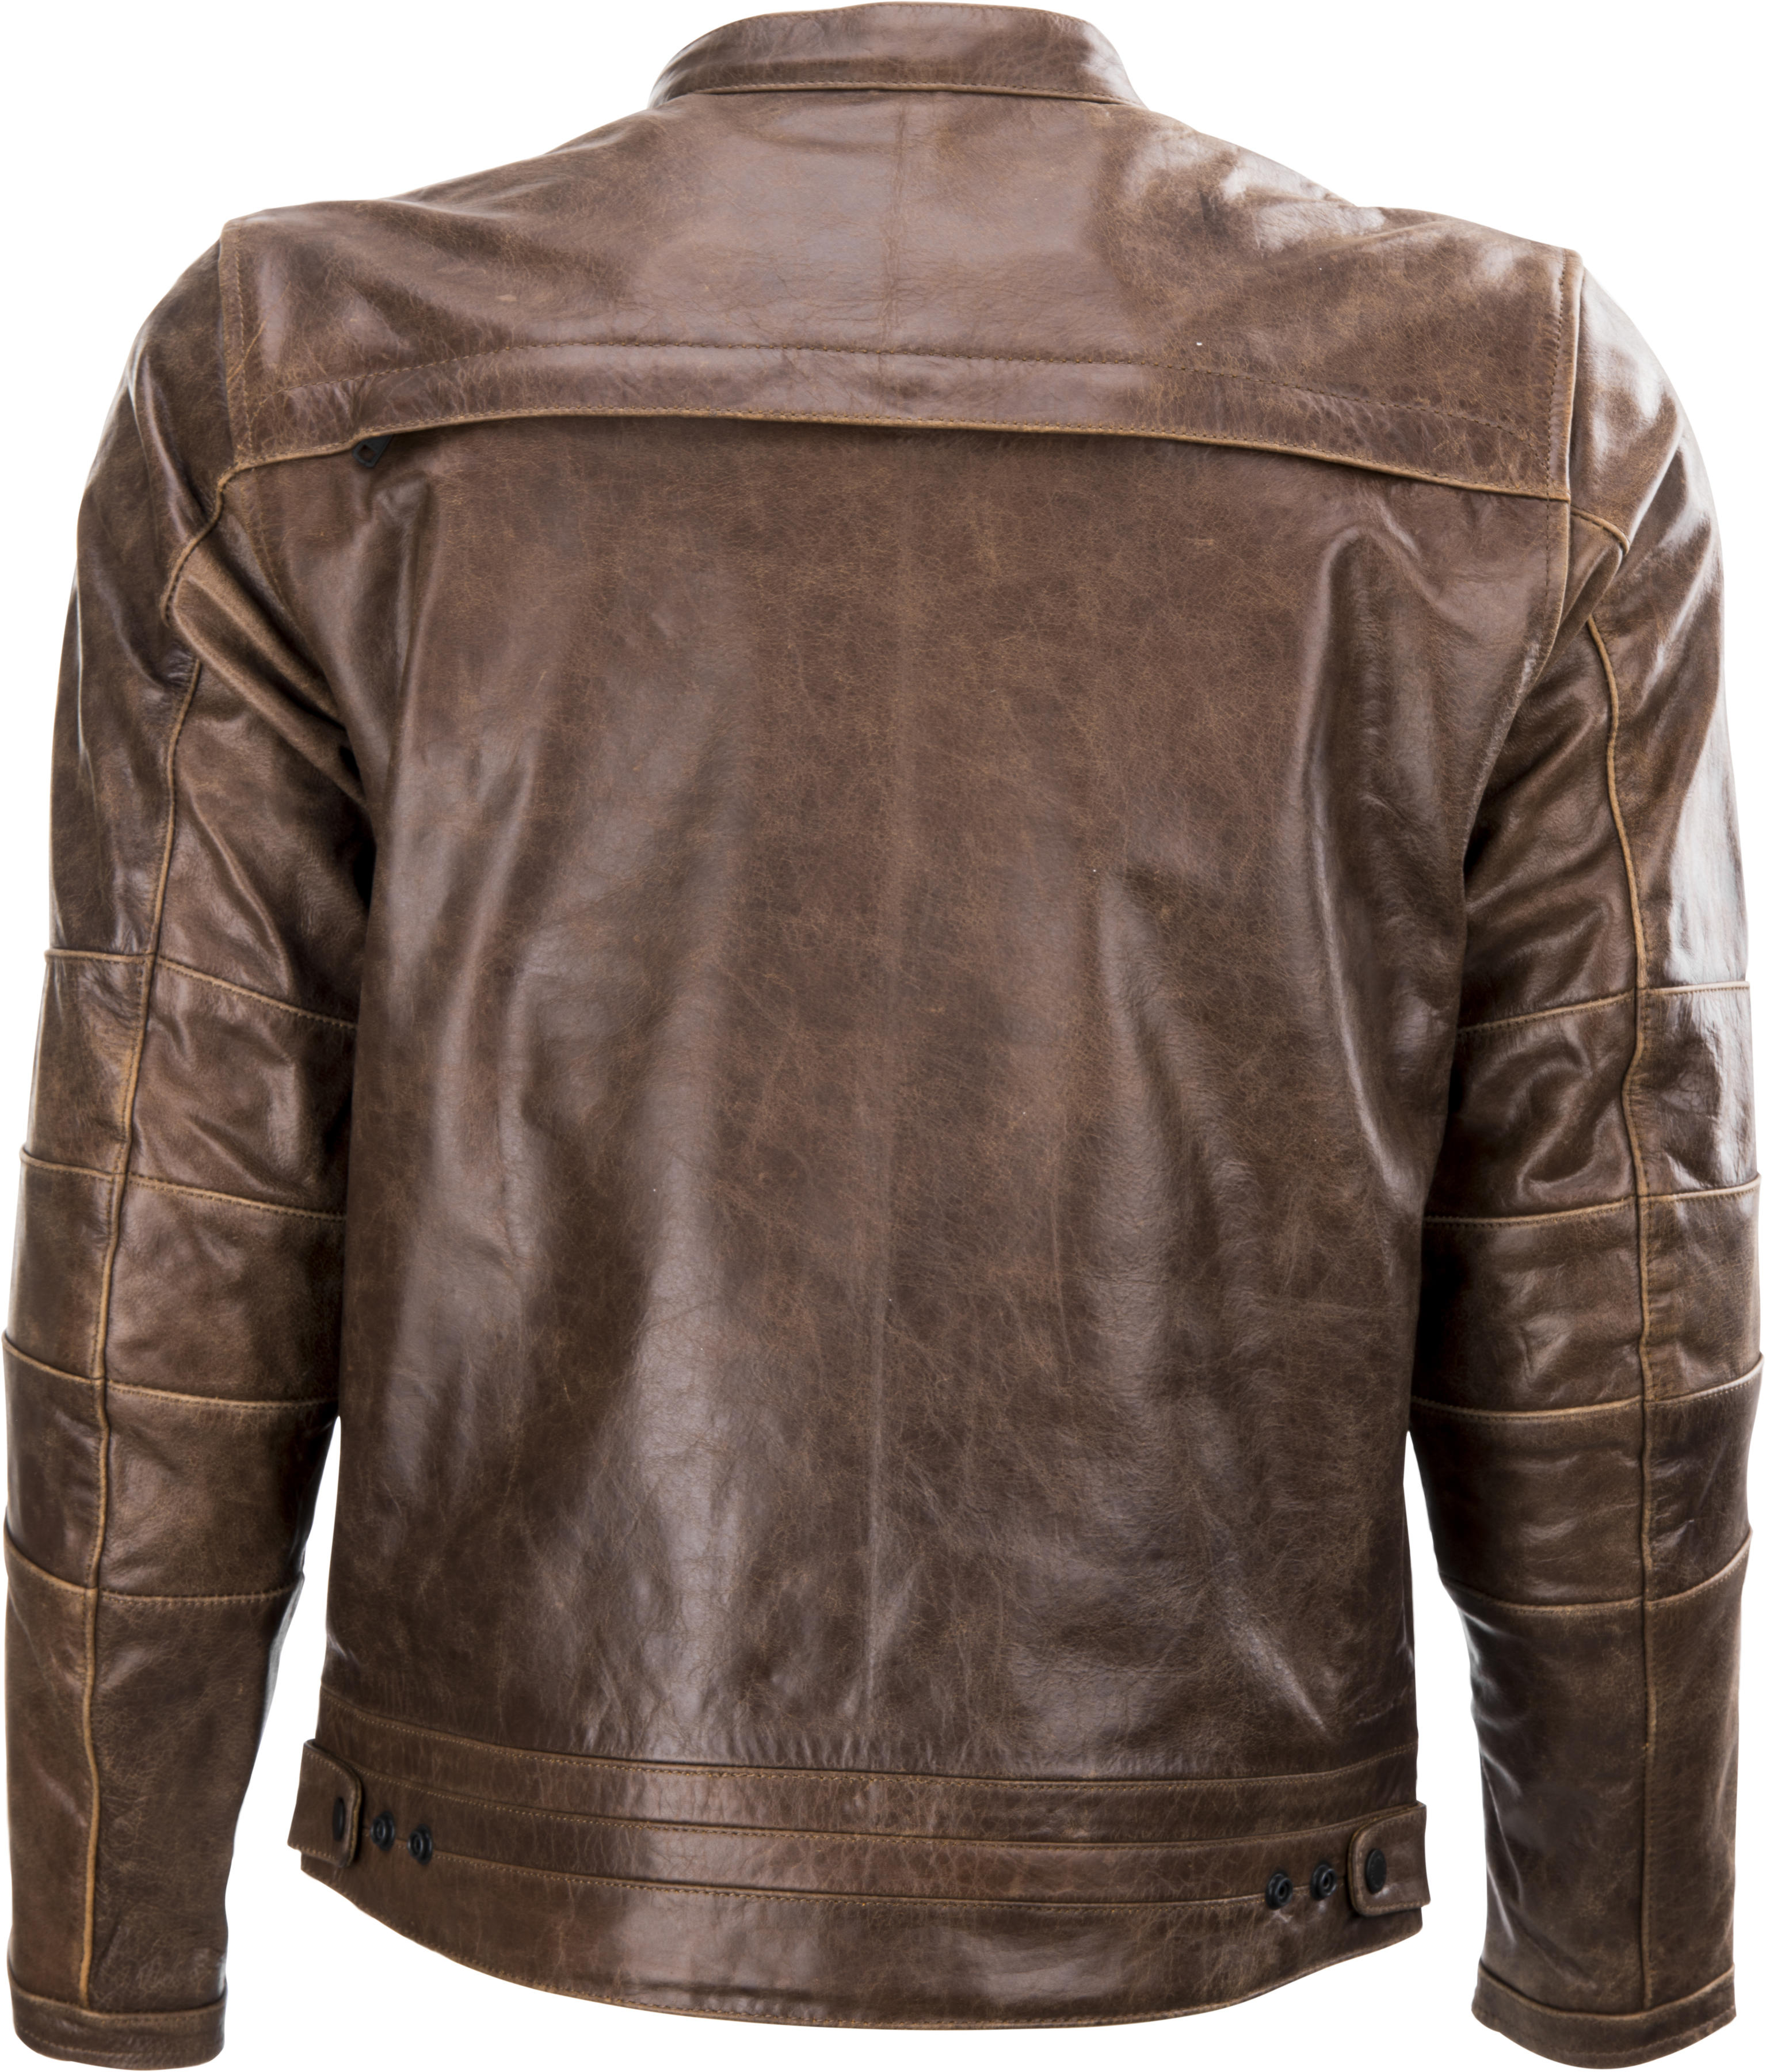 Primer Riding Jacket Brown 3X-Large - Click Image to Close